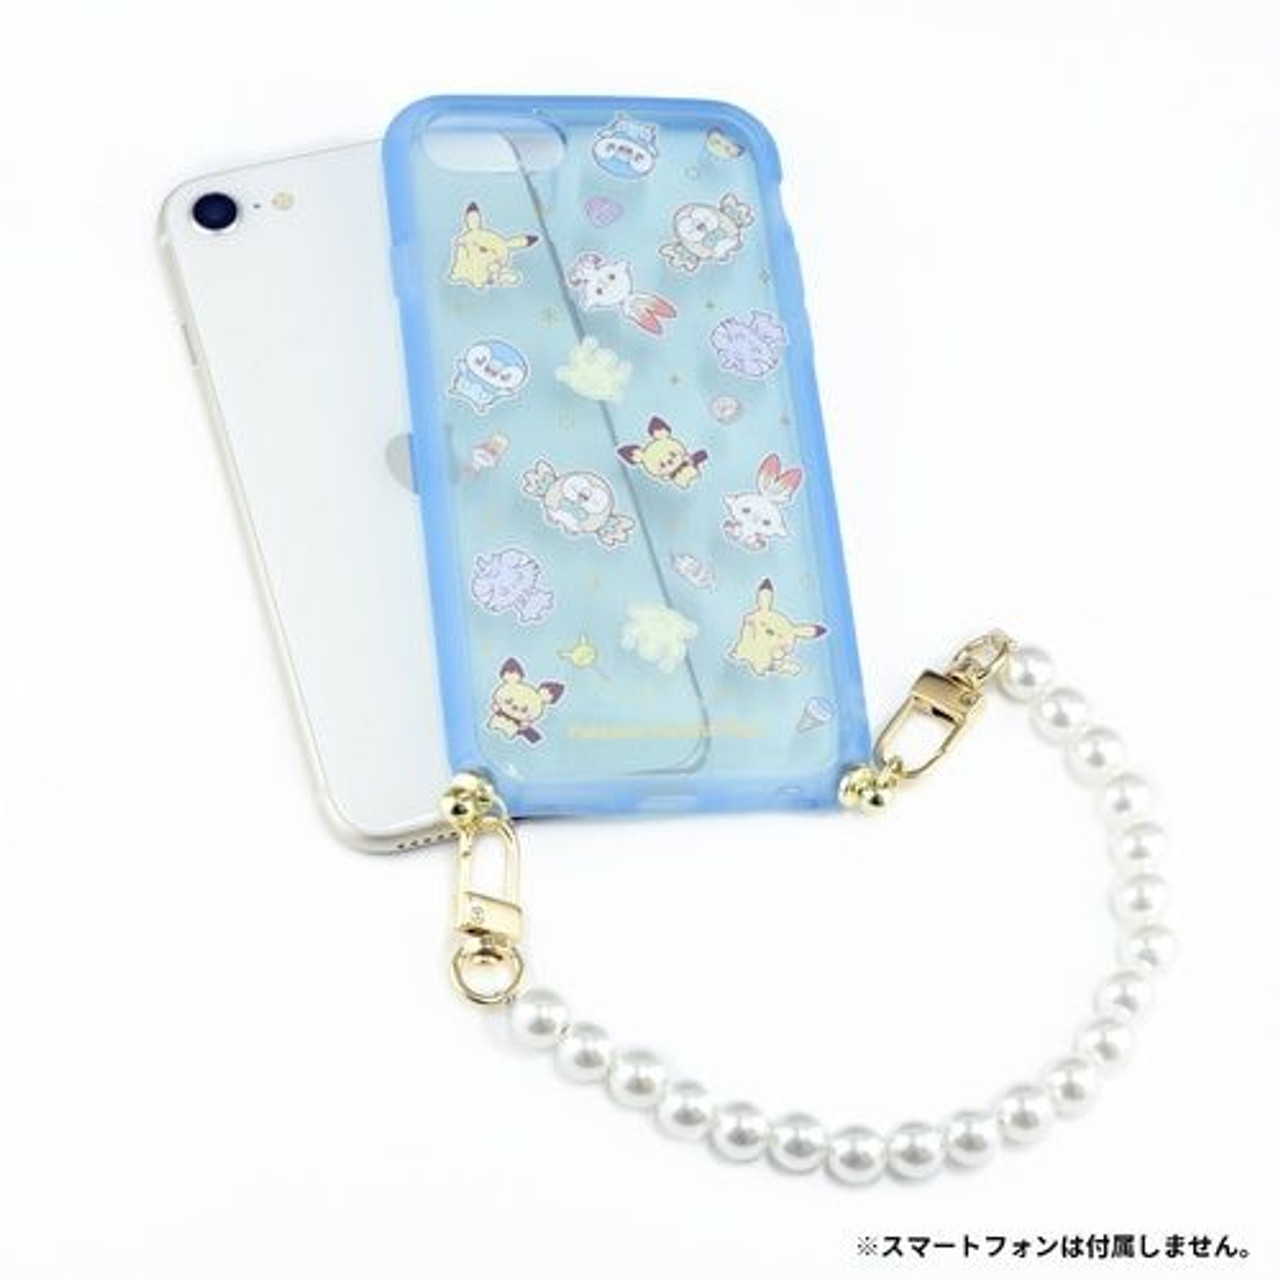 PokePeace IIIIfit Case for iPhone - with (3rd/2nd gen.)/8/7/6s/6 Everybody Pearl Strap SE